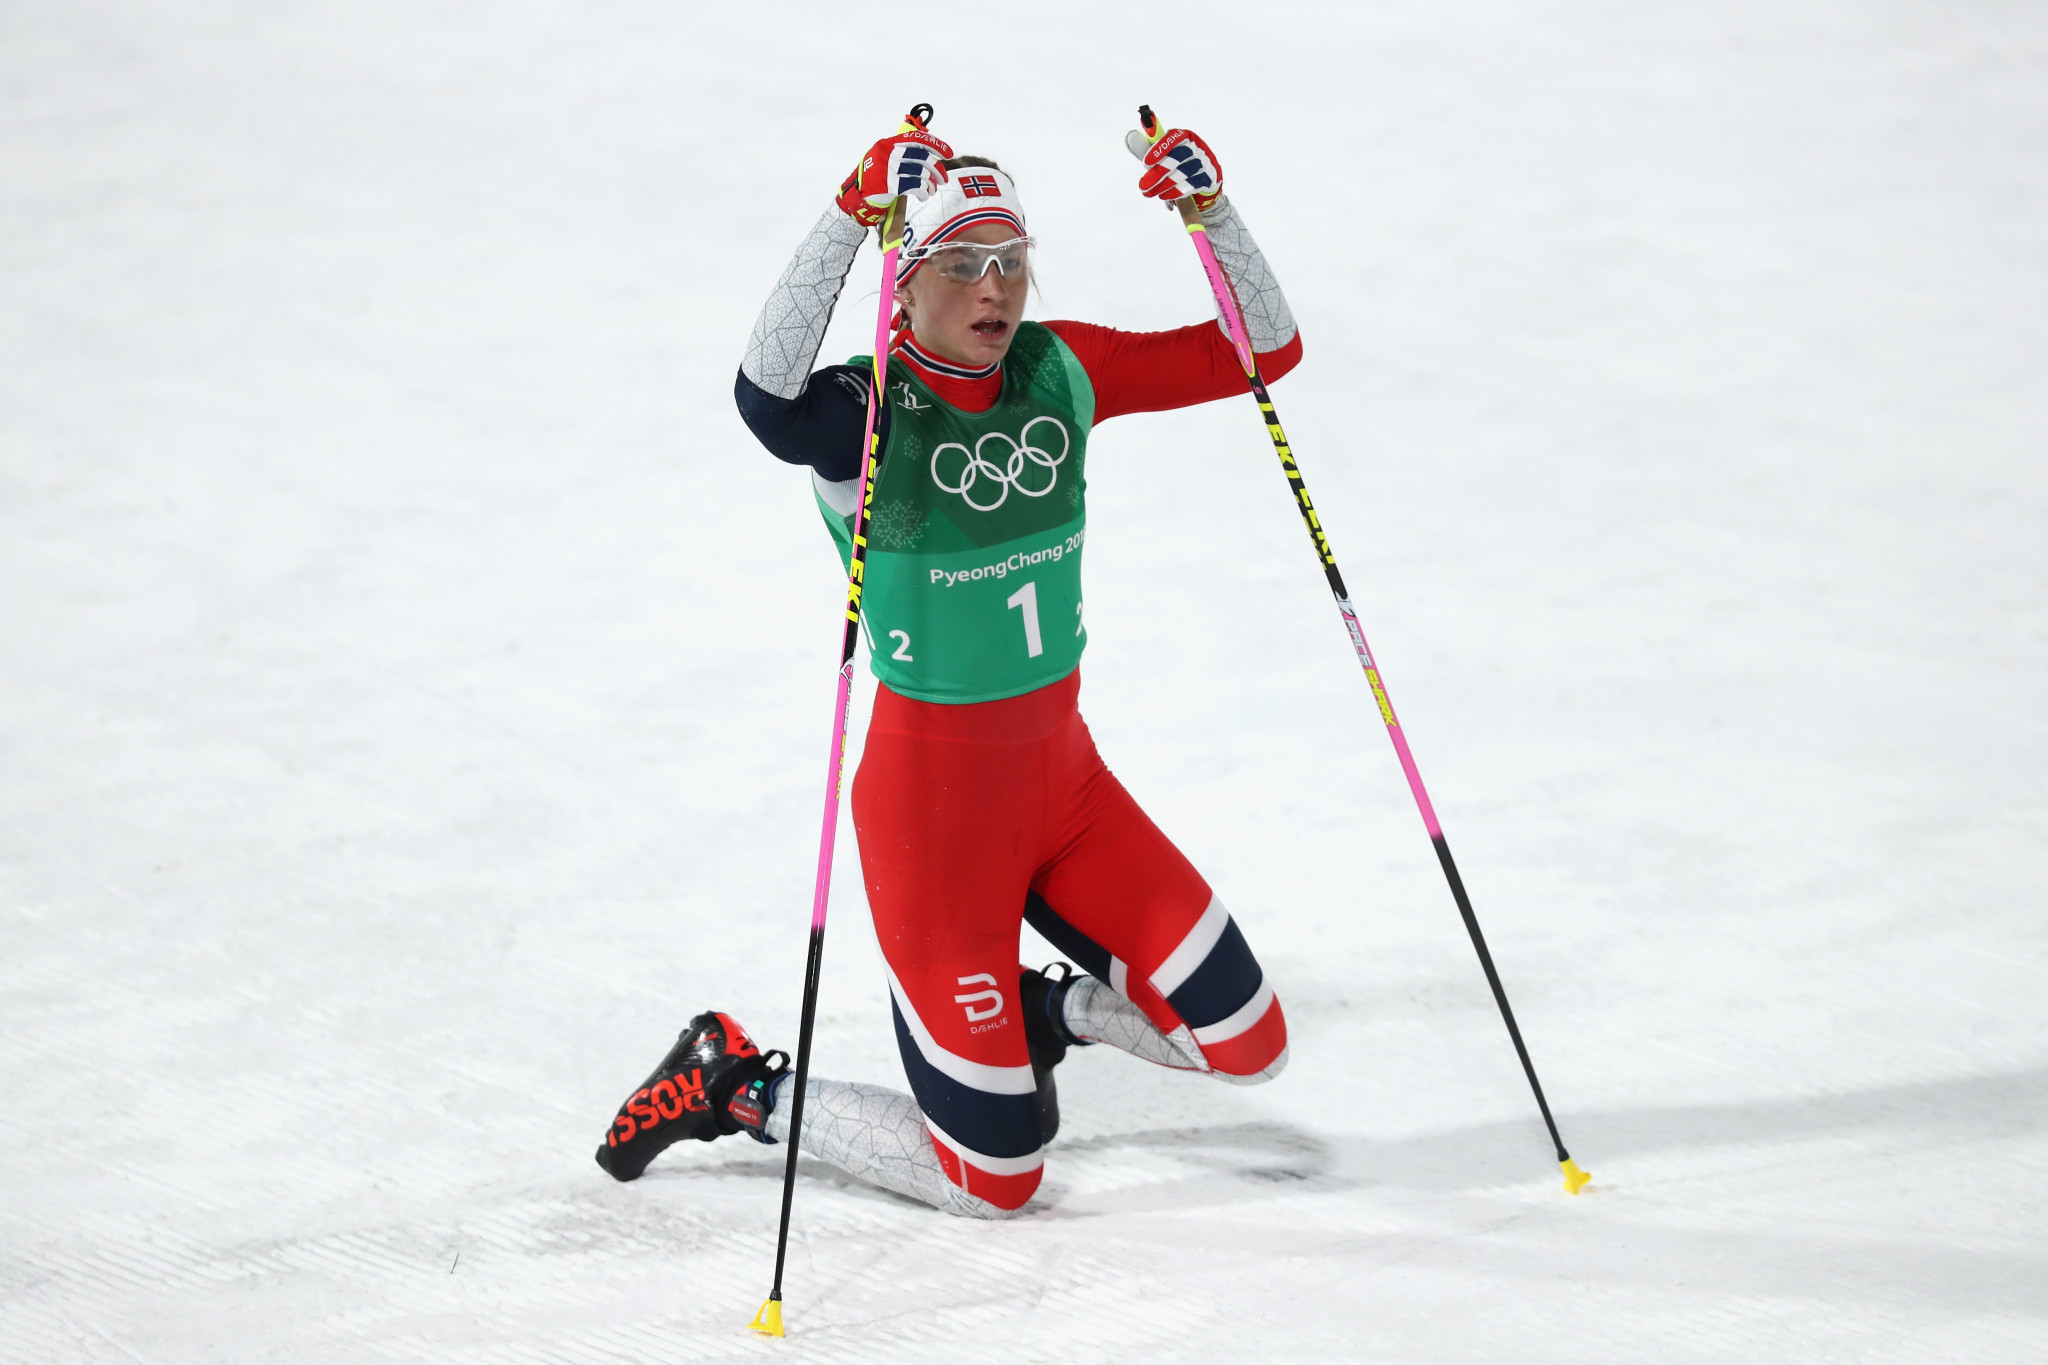 Astrid Uhrenholdt Jacobsen earned a gold medal in the team relay at the Pyeongchang 2018 Winter Olympic Games ©Getty Images